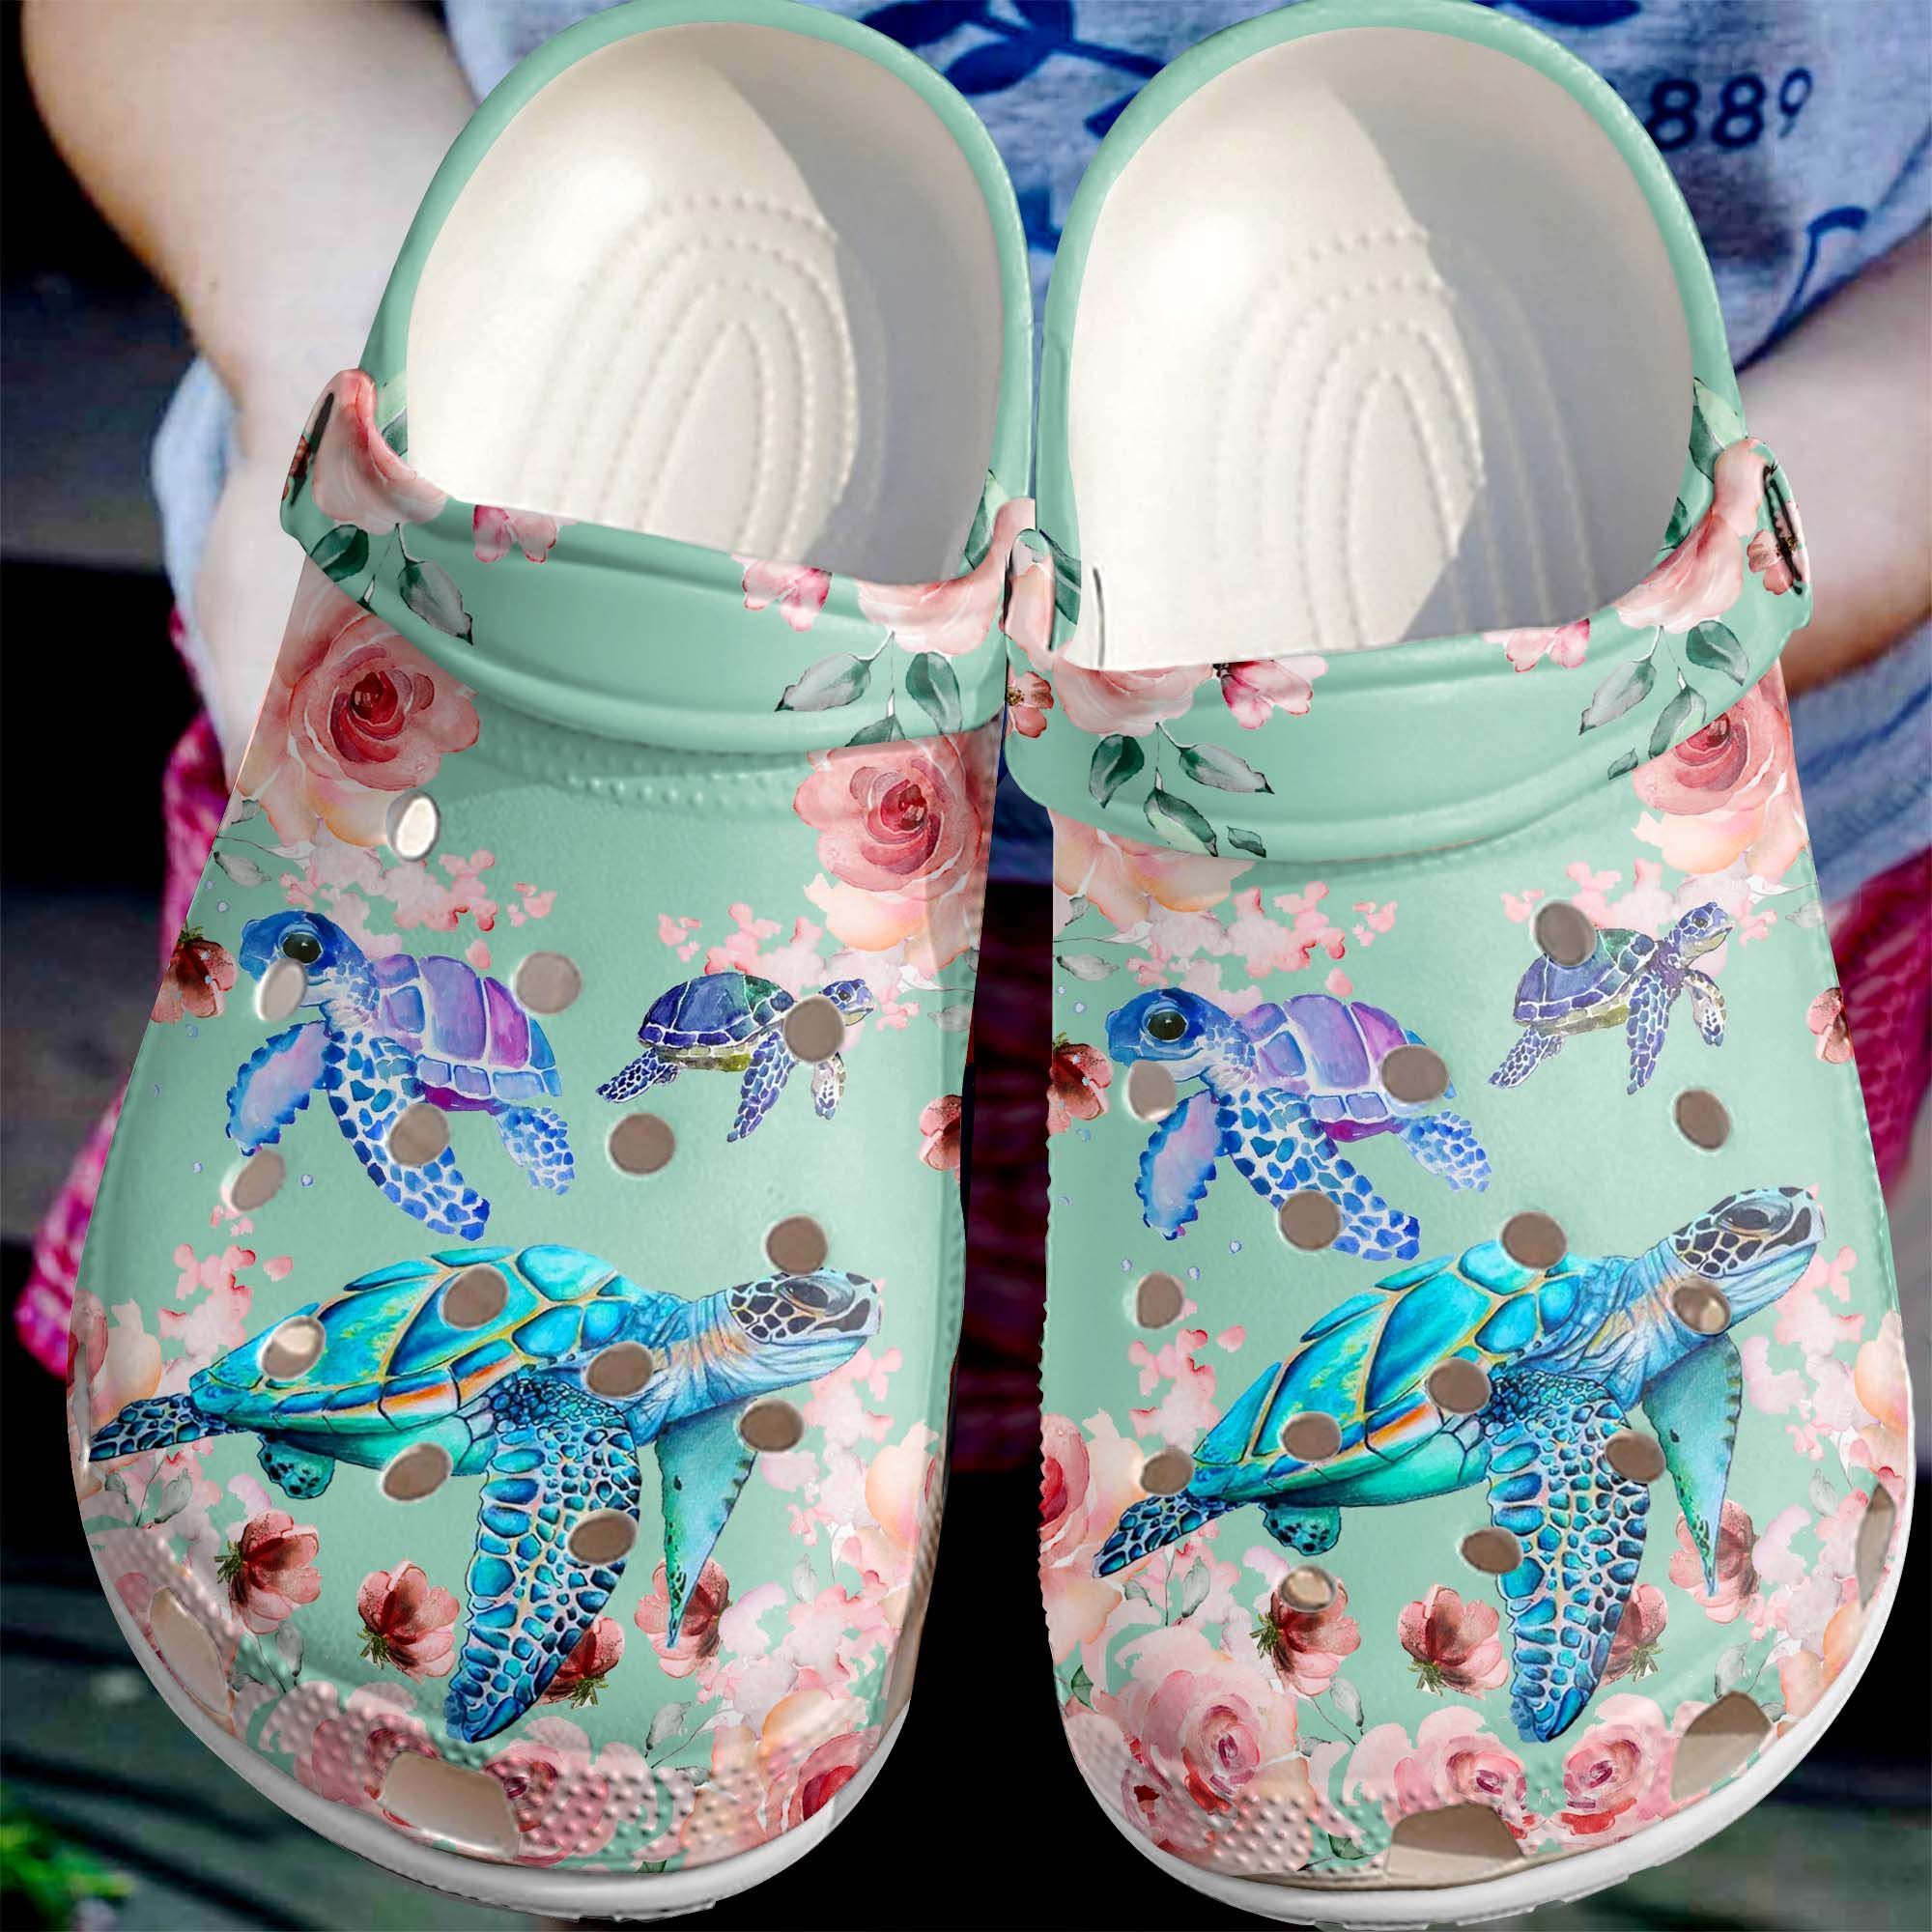 Sea Turtles With Roses Shoes Crocs Clog  Beautiful Ocean Flower Shoes Crocbland Clog For Women Mother Sister Daughter Niece Friend